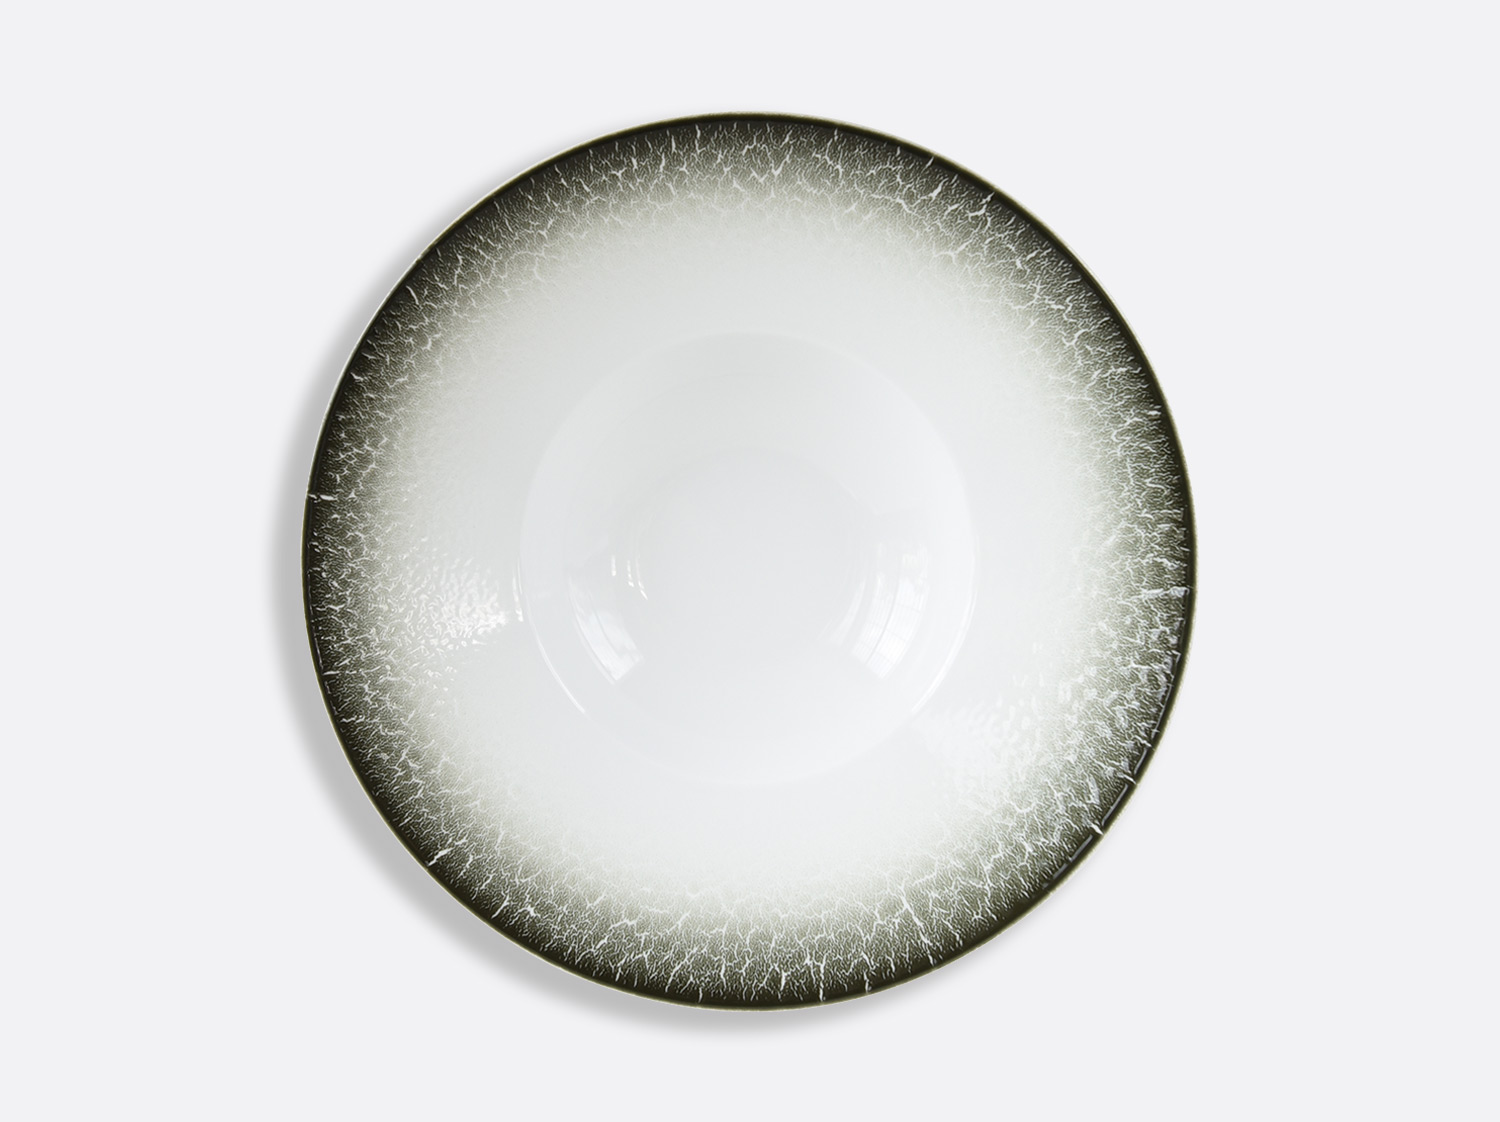 China Large rim soup plate 10.6" of the collection TERRA LICHEN | Bernardaud